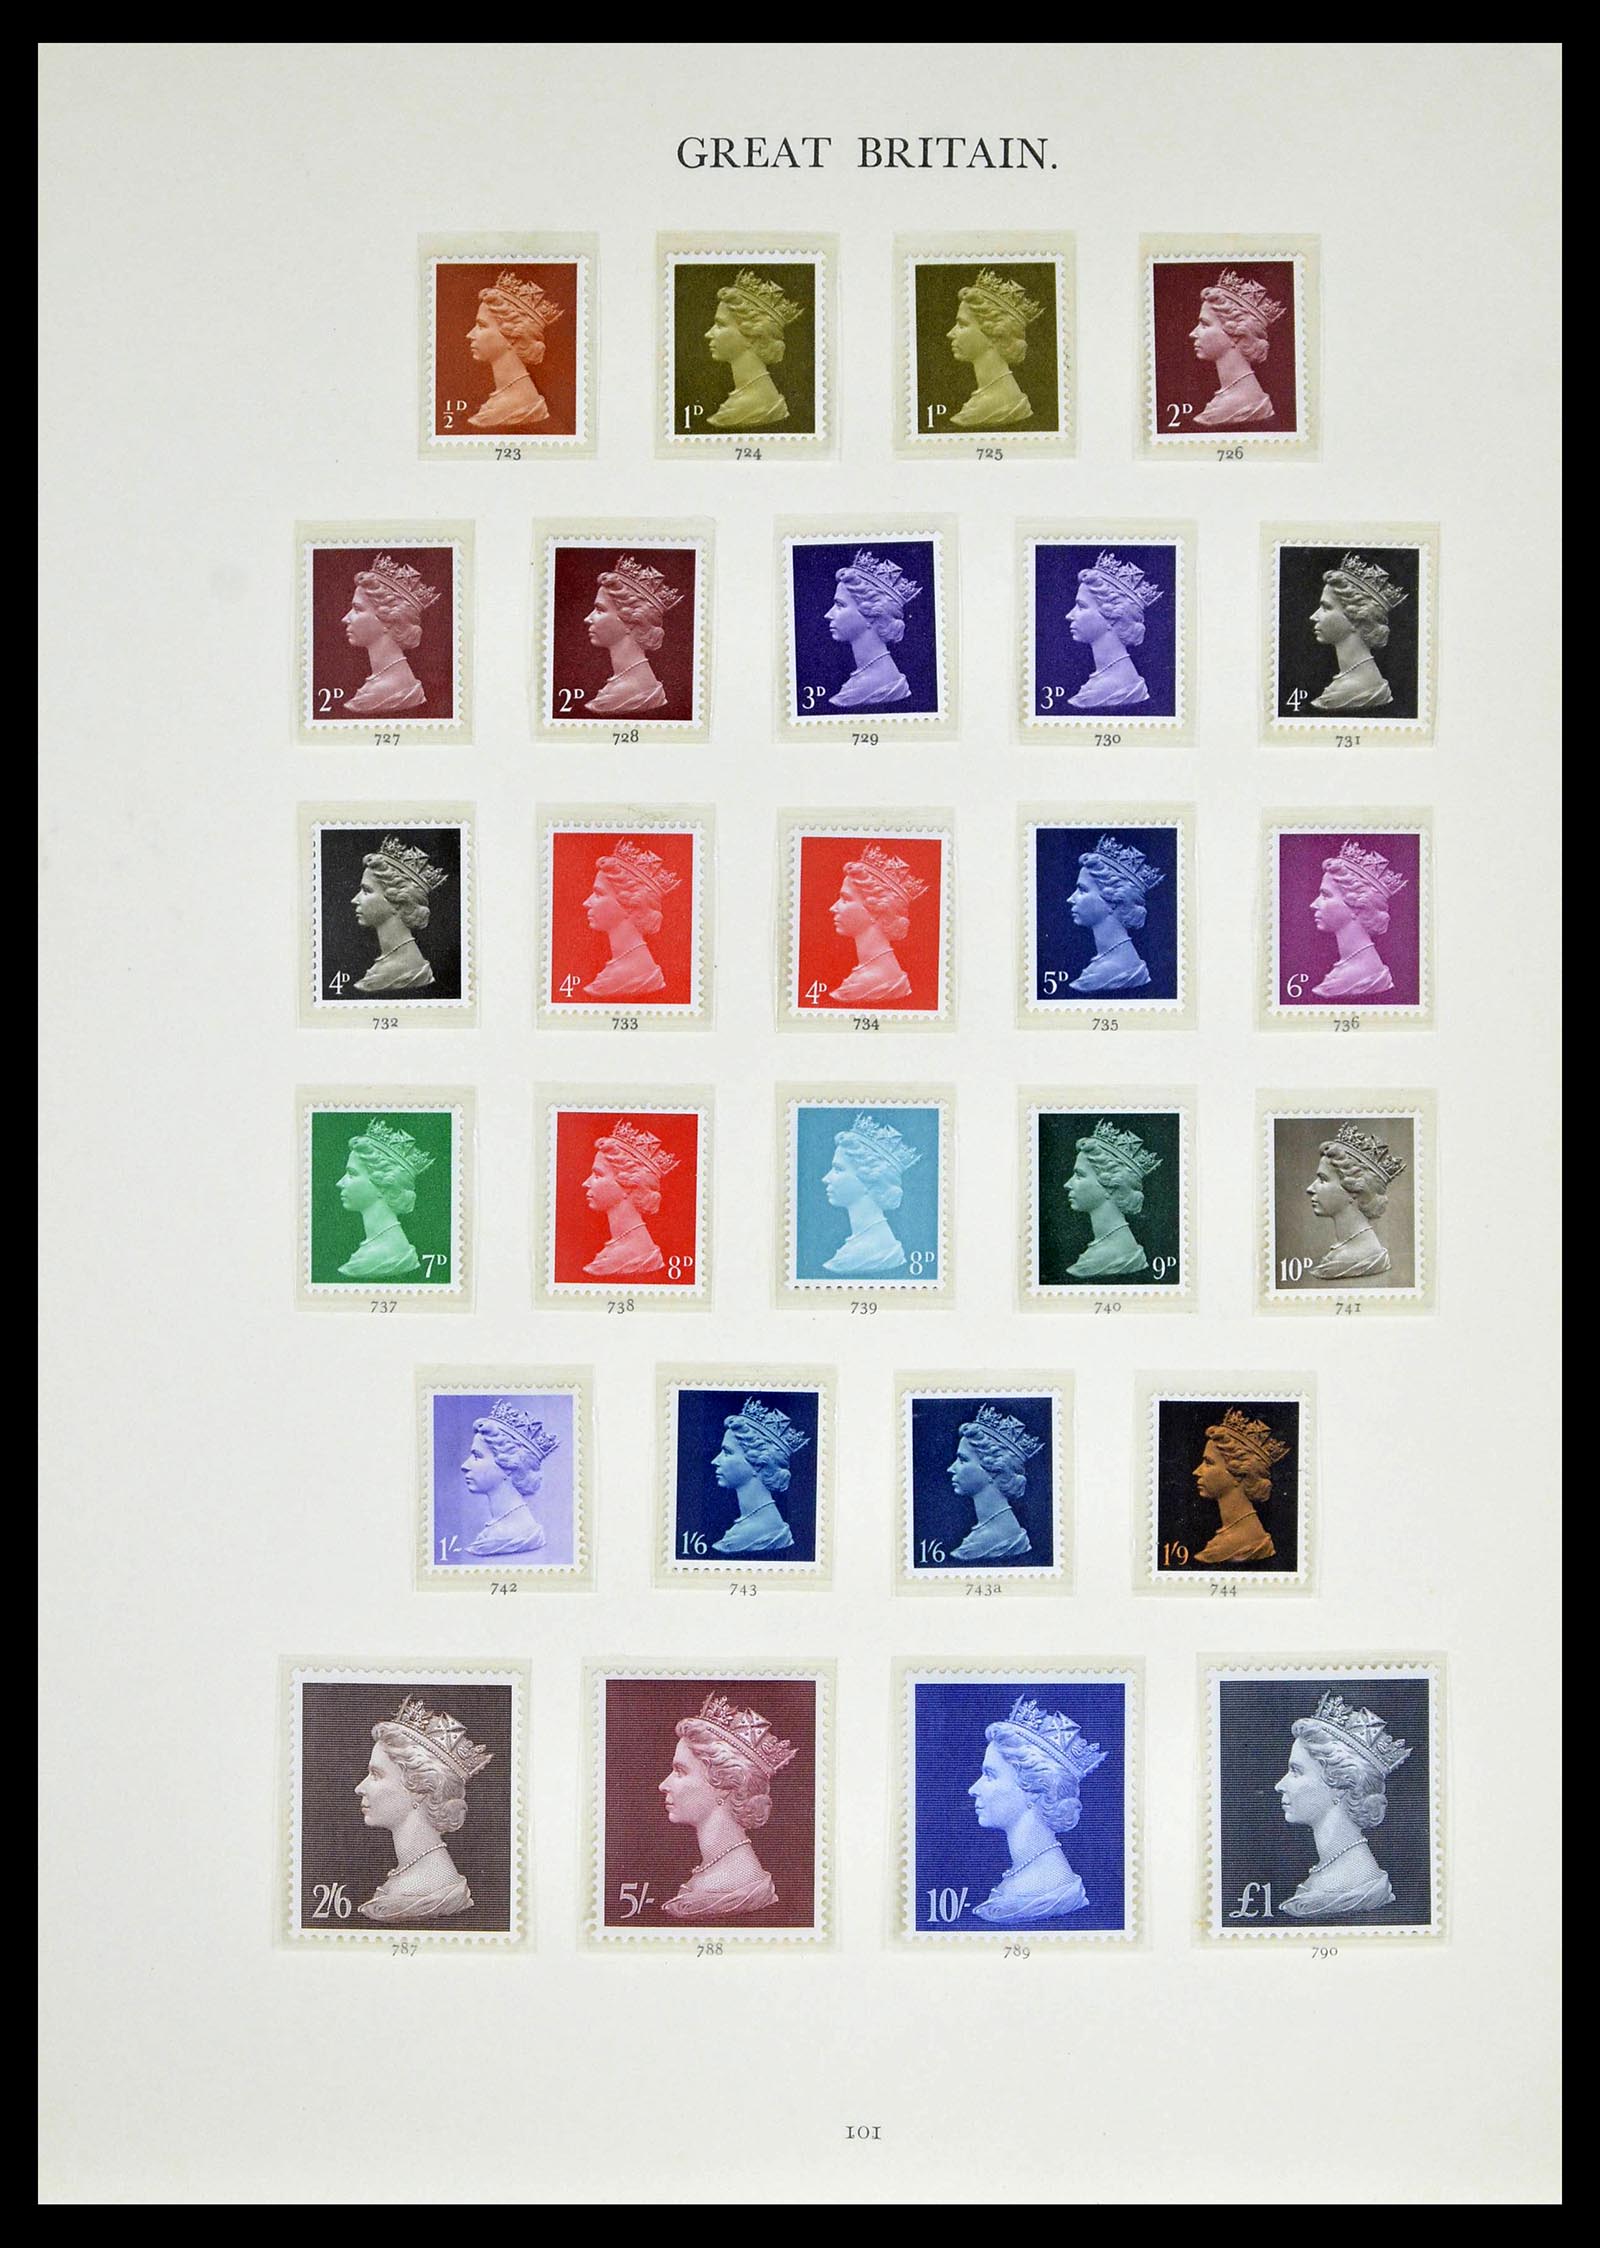 39025 0047 - Stamp collection 39025 Great Britain specialised 1840-1990.